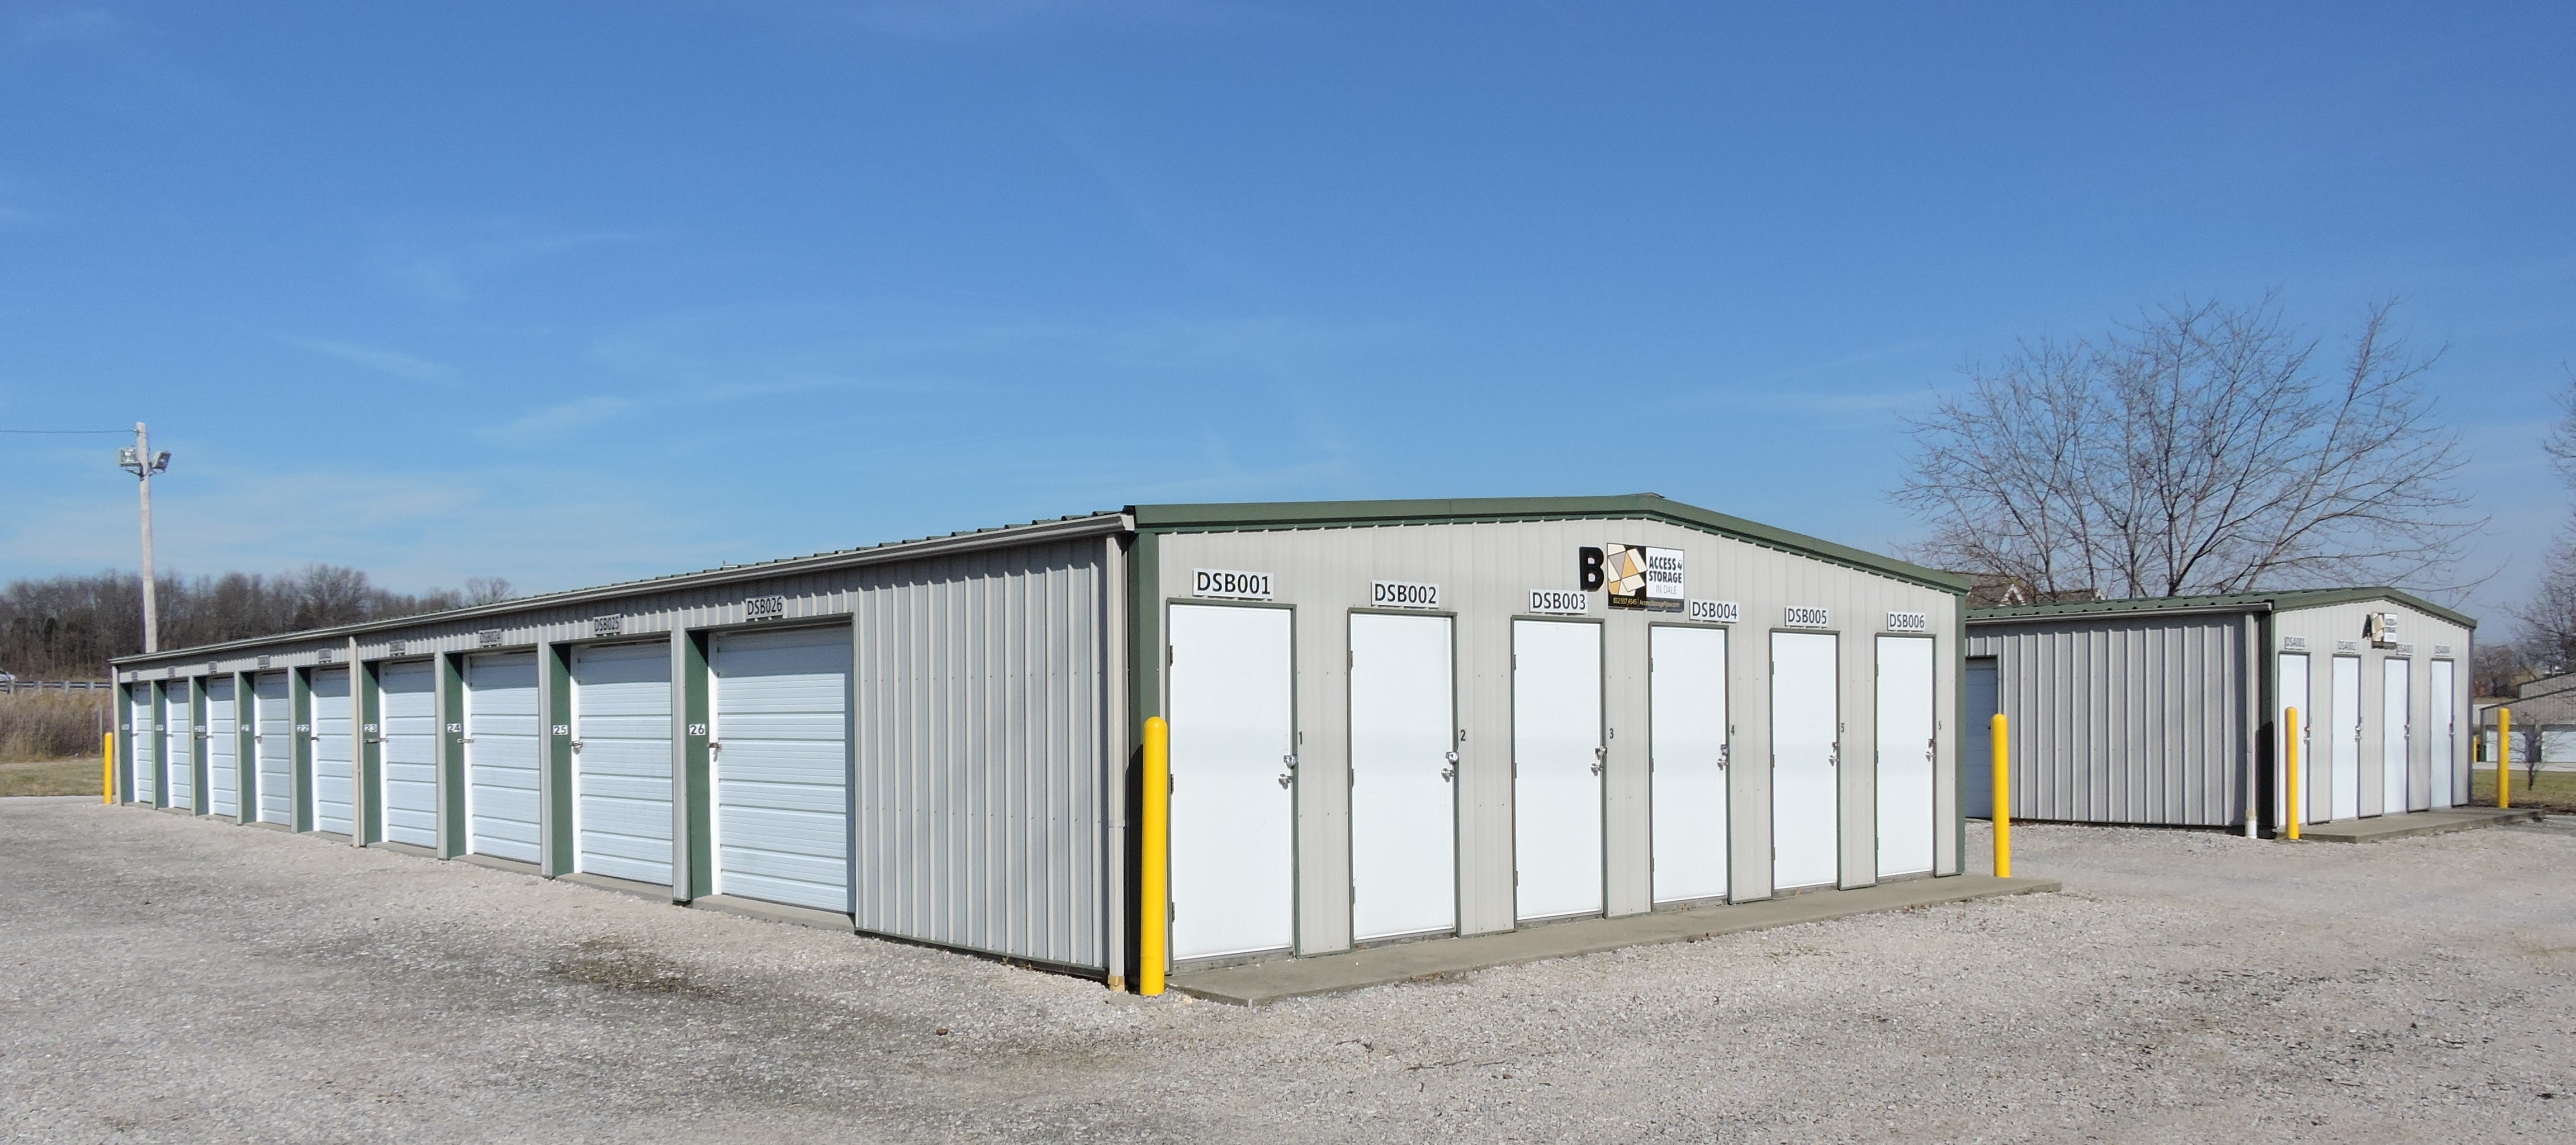 Access Storage in Dale, highlighting white-door drive-up units and secure, covered storage for RVs.